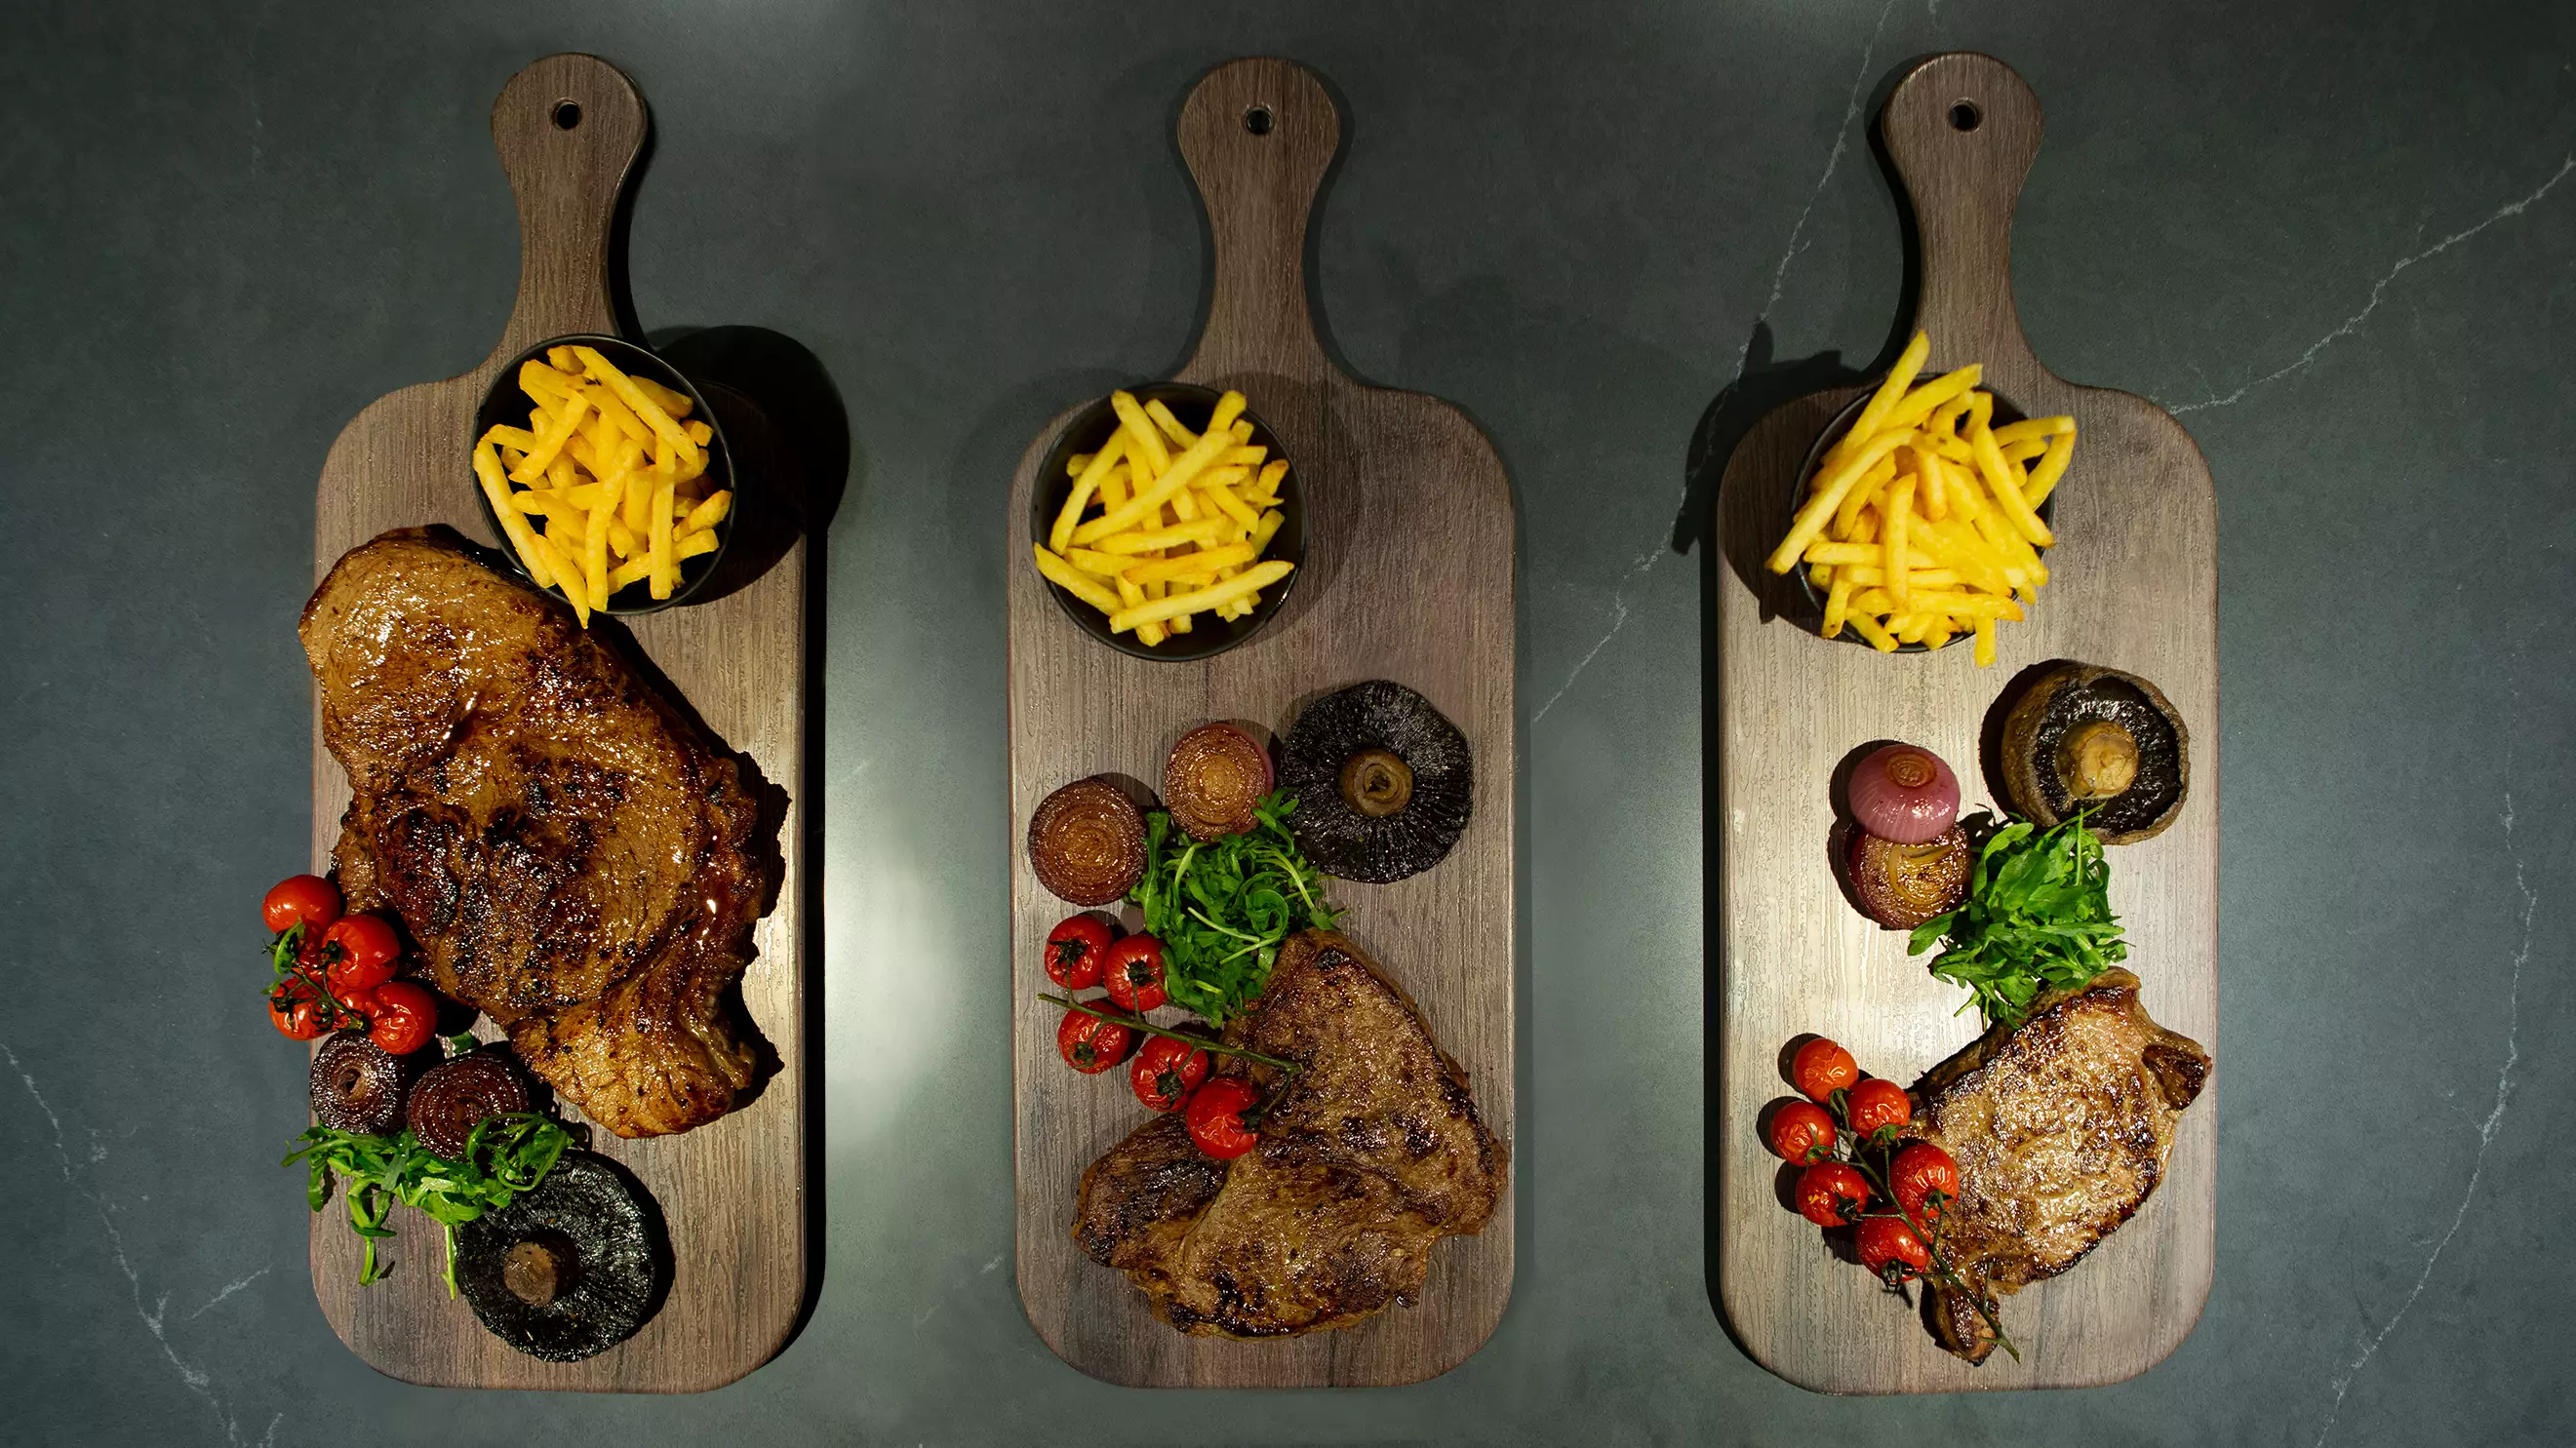 The 28oz steak (left) will be available from 13 June.